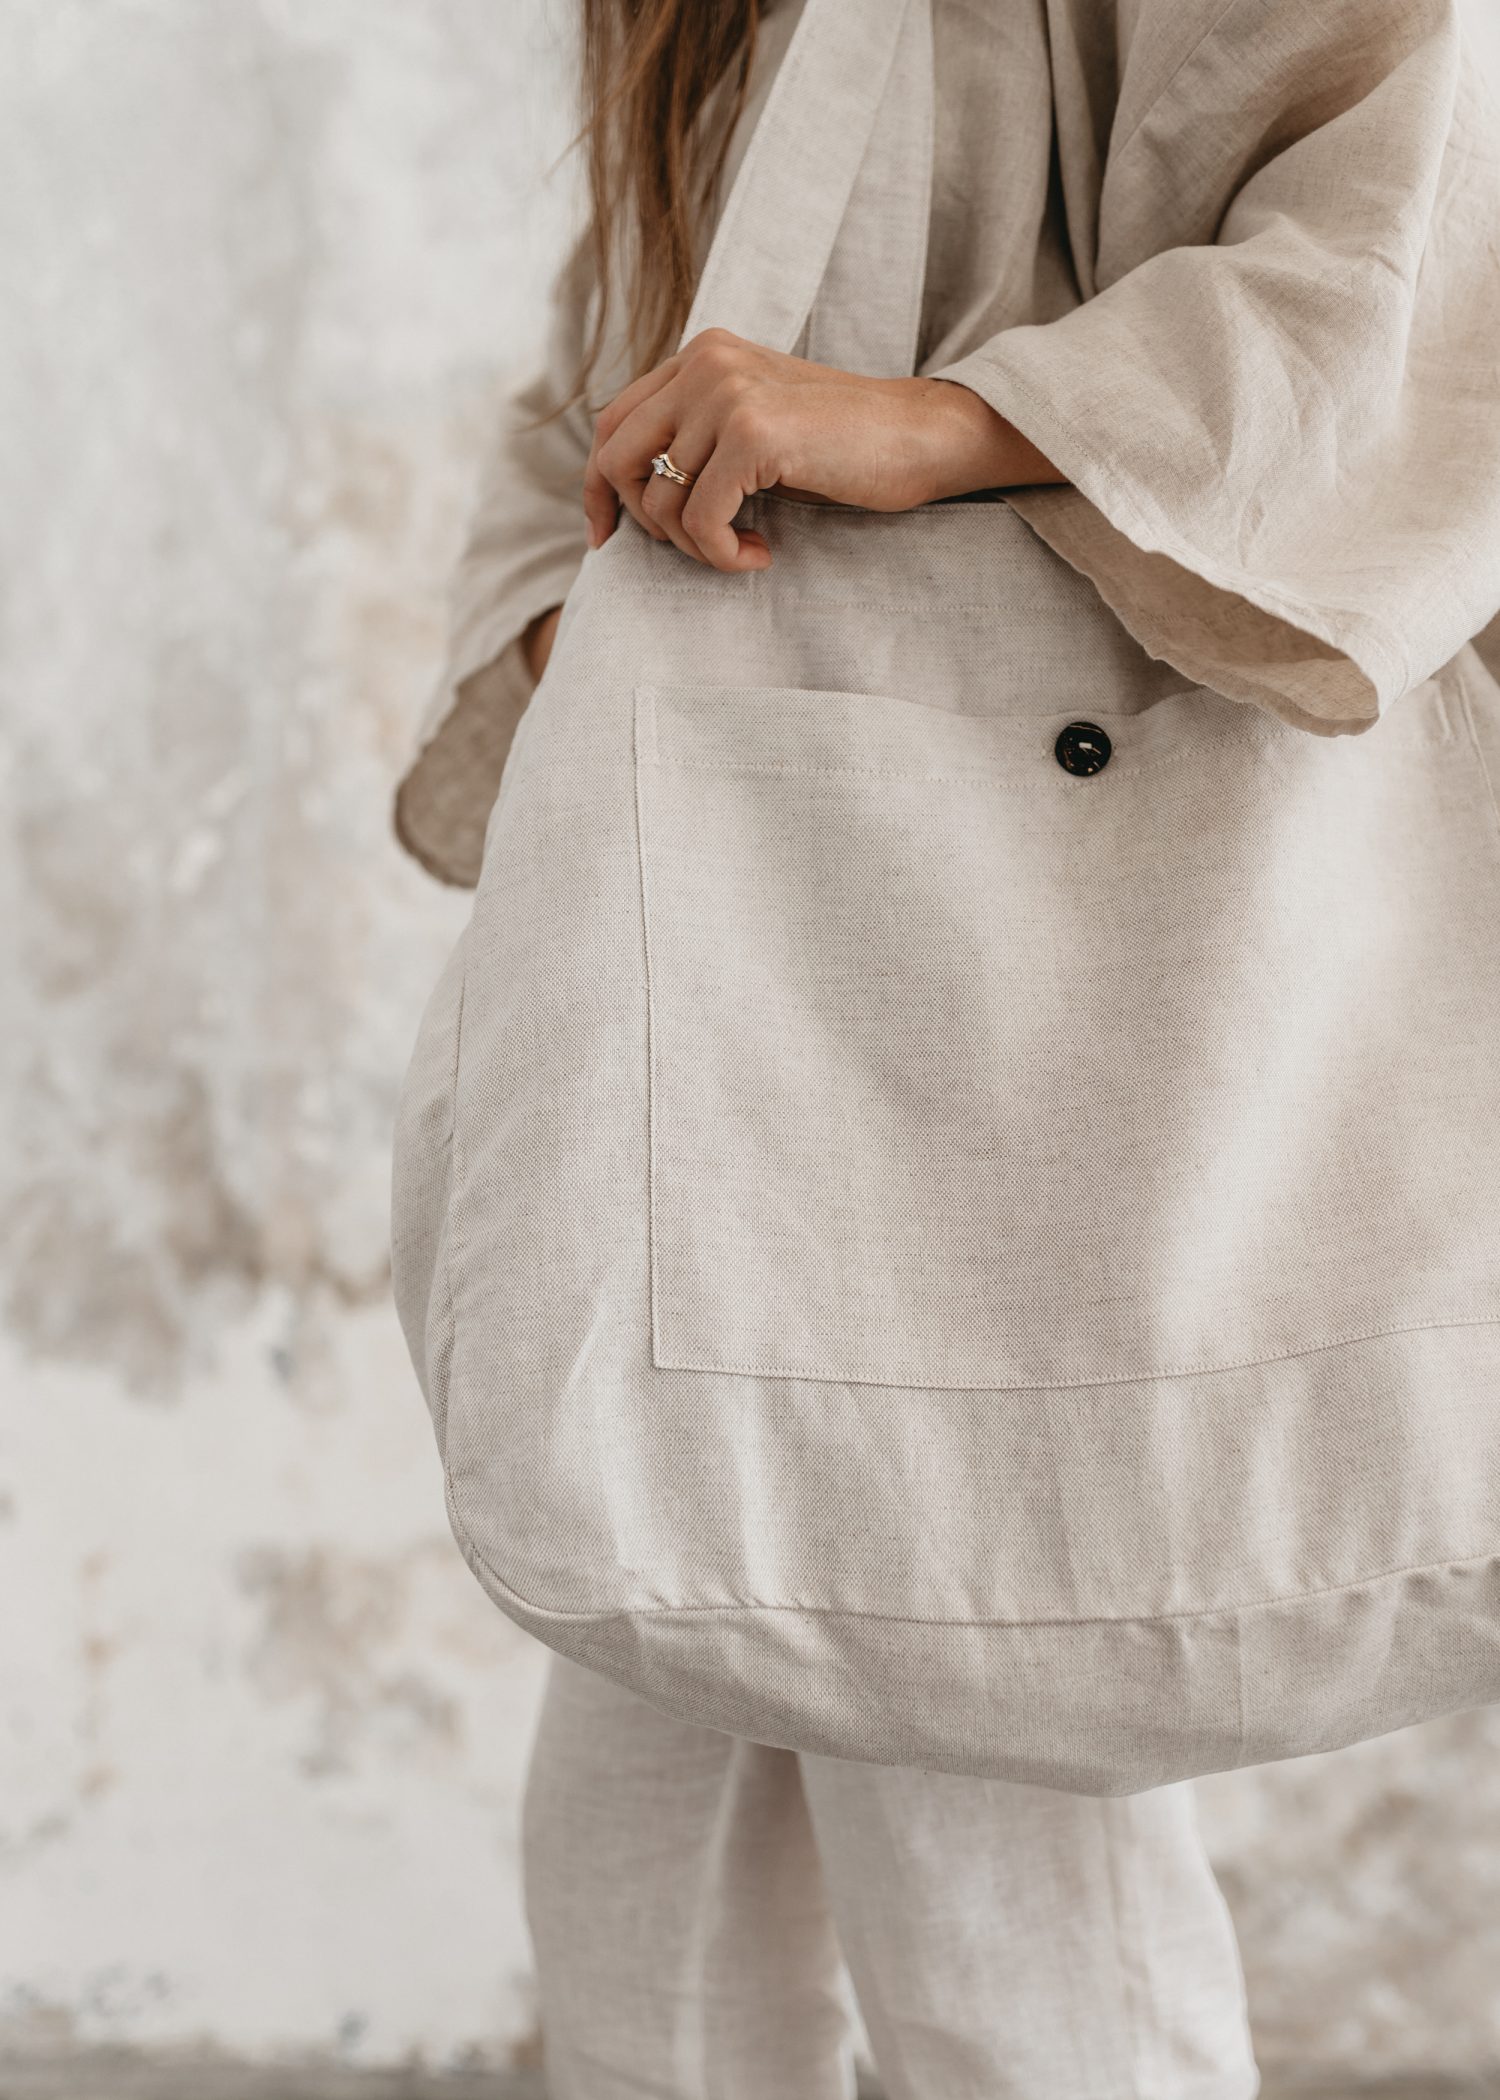 Nowhere & Everywhere Linen Tote Bag Recovered Recycled Redirected Landfill Dead stock Zero Waste Coconut Buttons Ethical Sustainable Australia NZ UK Canada America USA